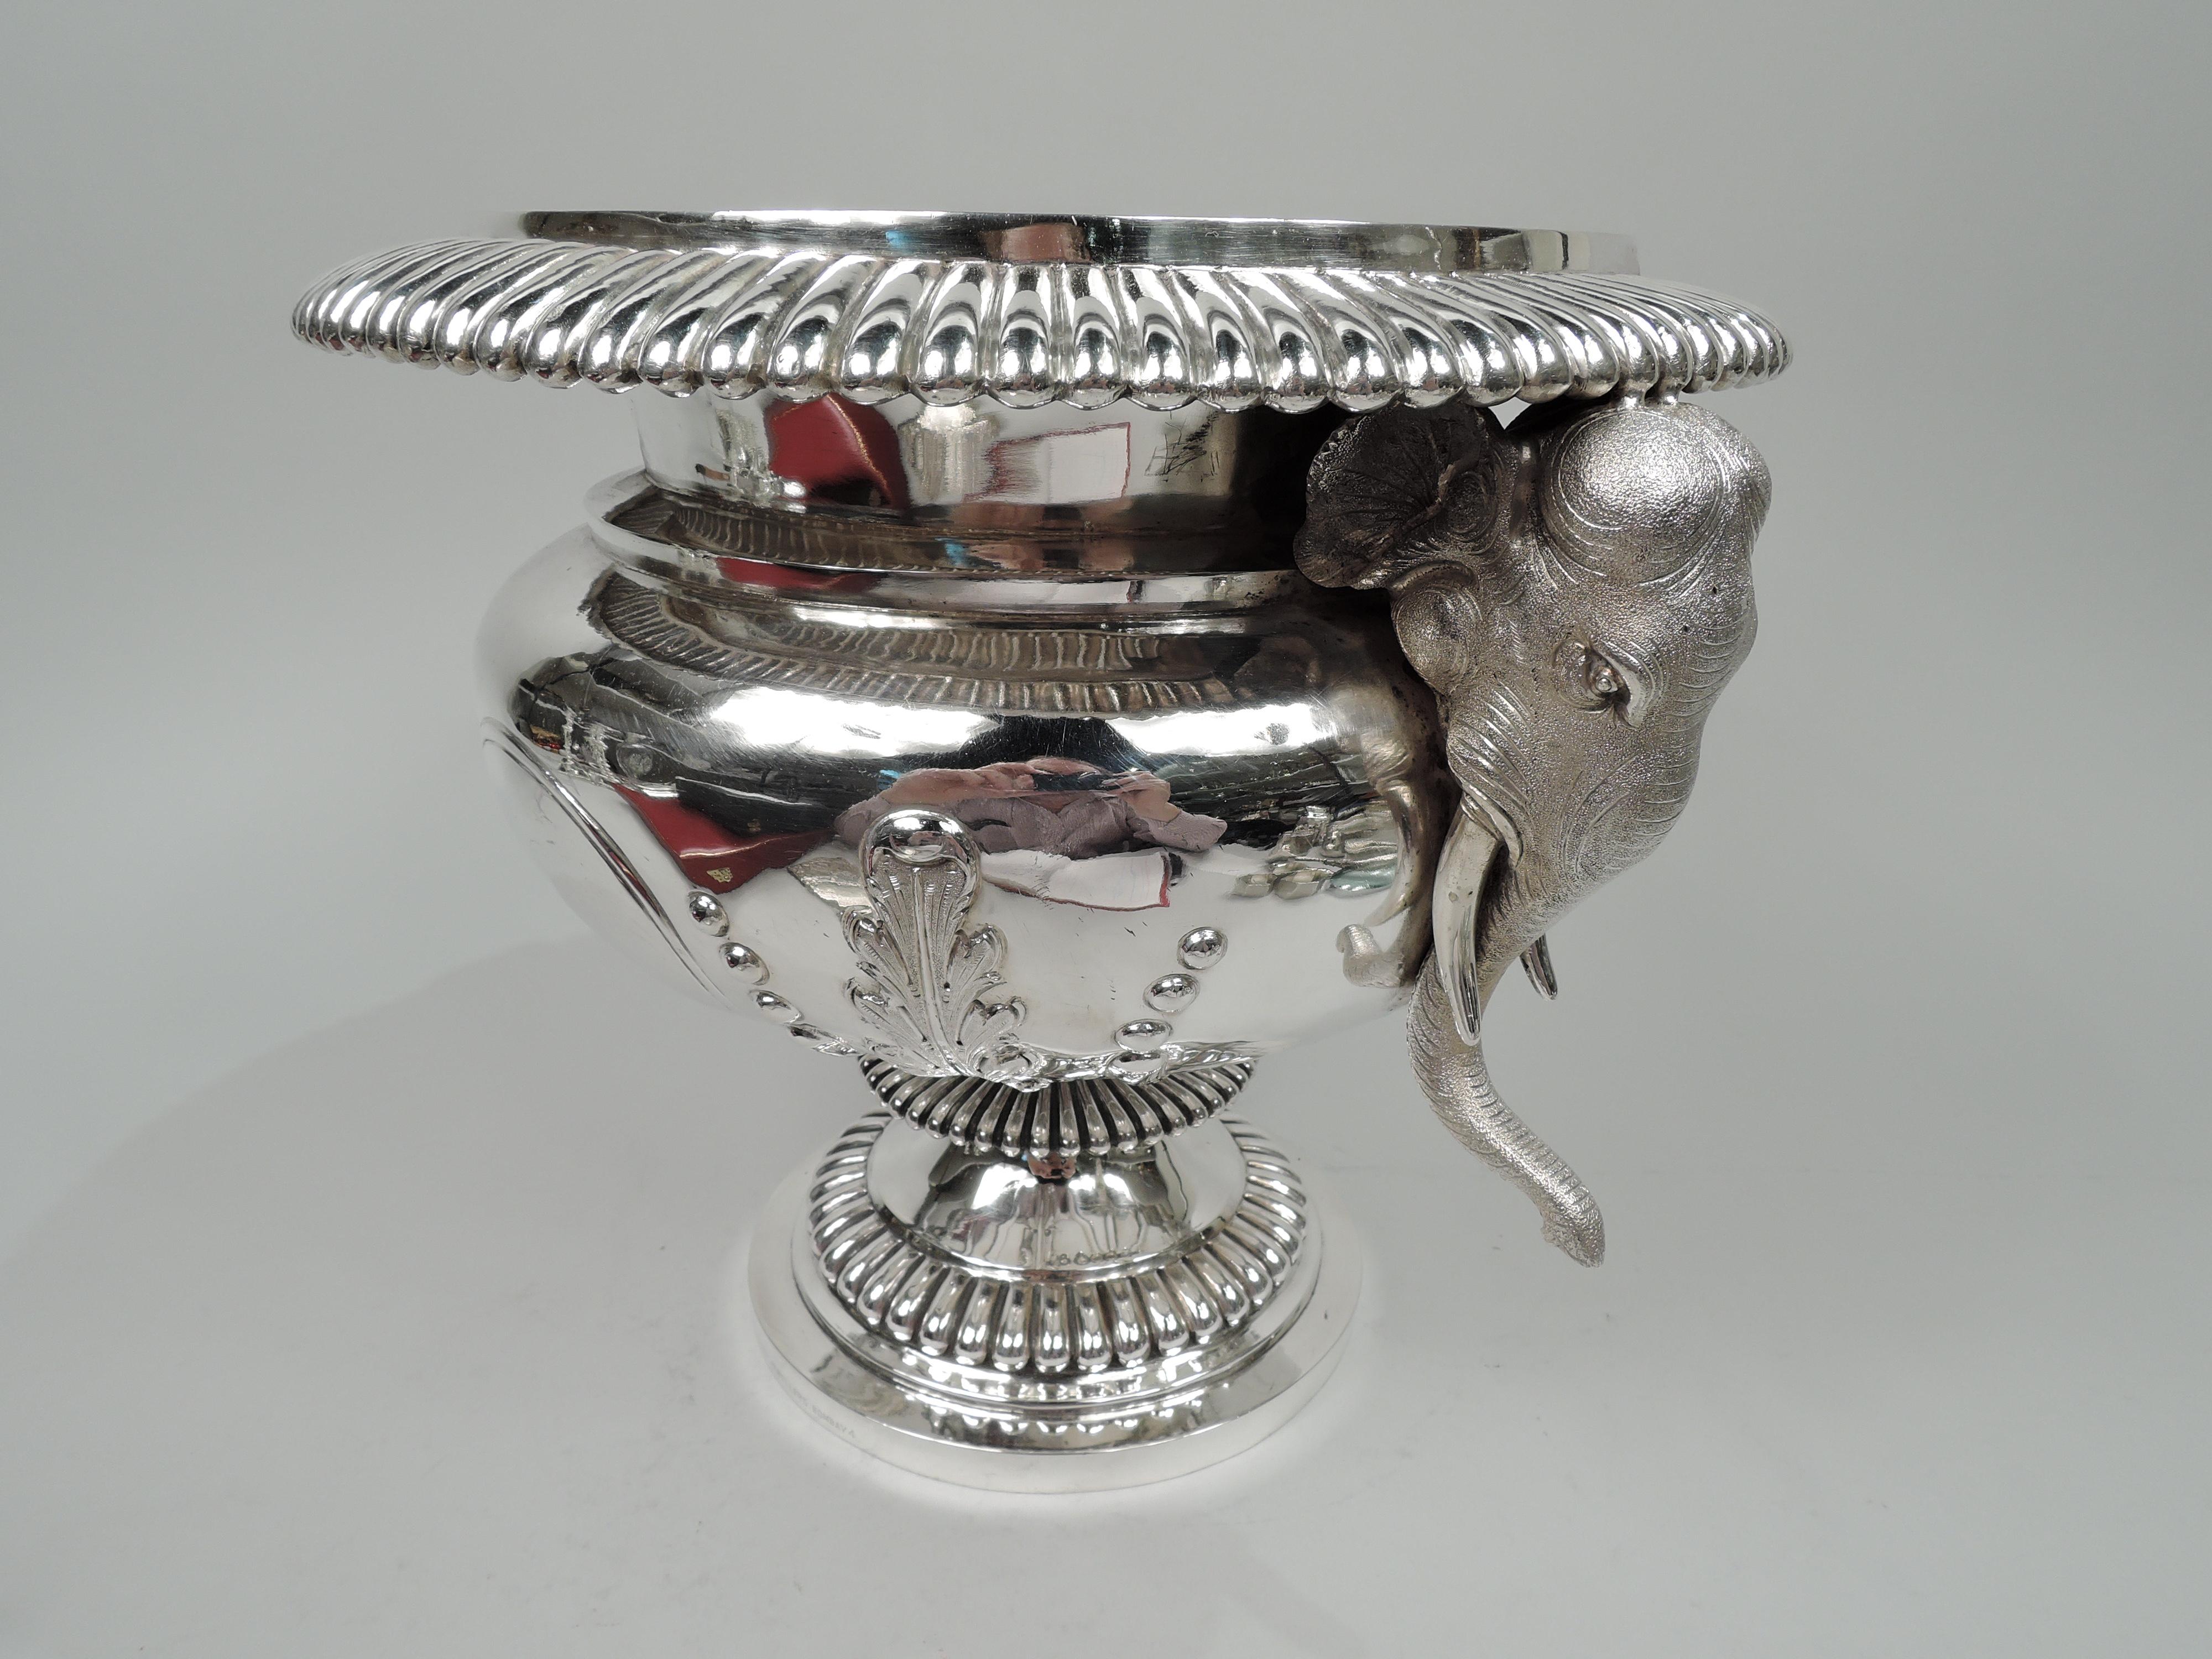 Indian silver wine cooler, ca 1920. Bellied bowl with wide rim on short support with flange flowing into stepped foot. Classical form with bold gadrooning and further enlivened with elephant head side mounts with saggy irregular ears and gracefully